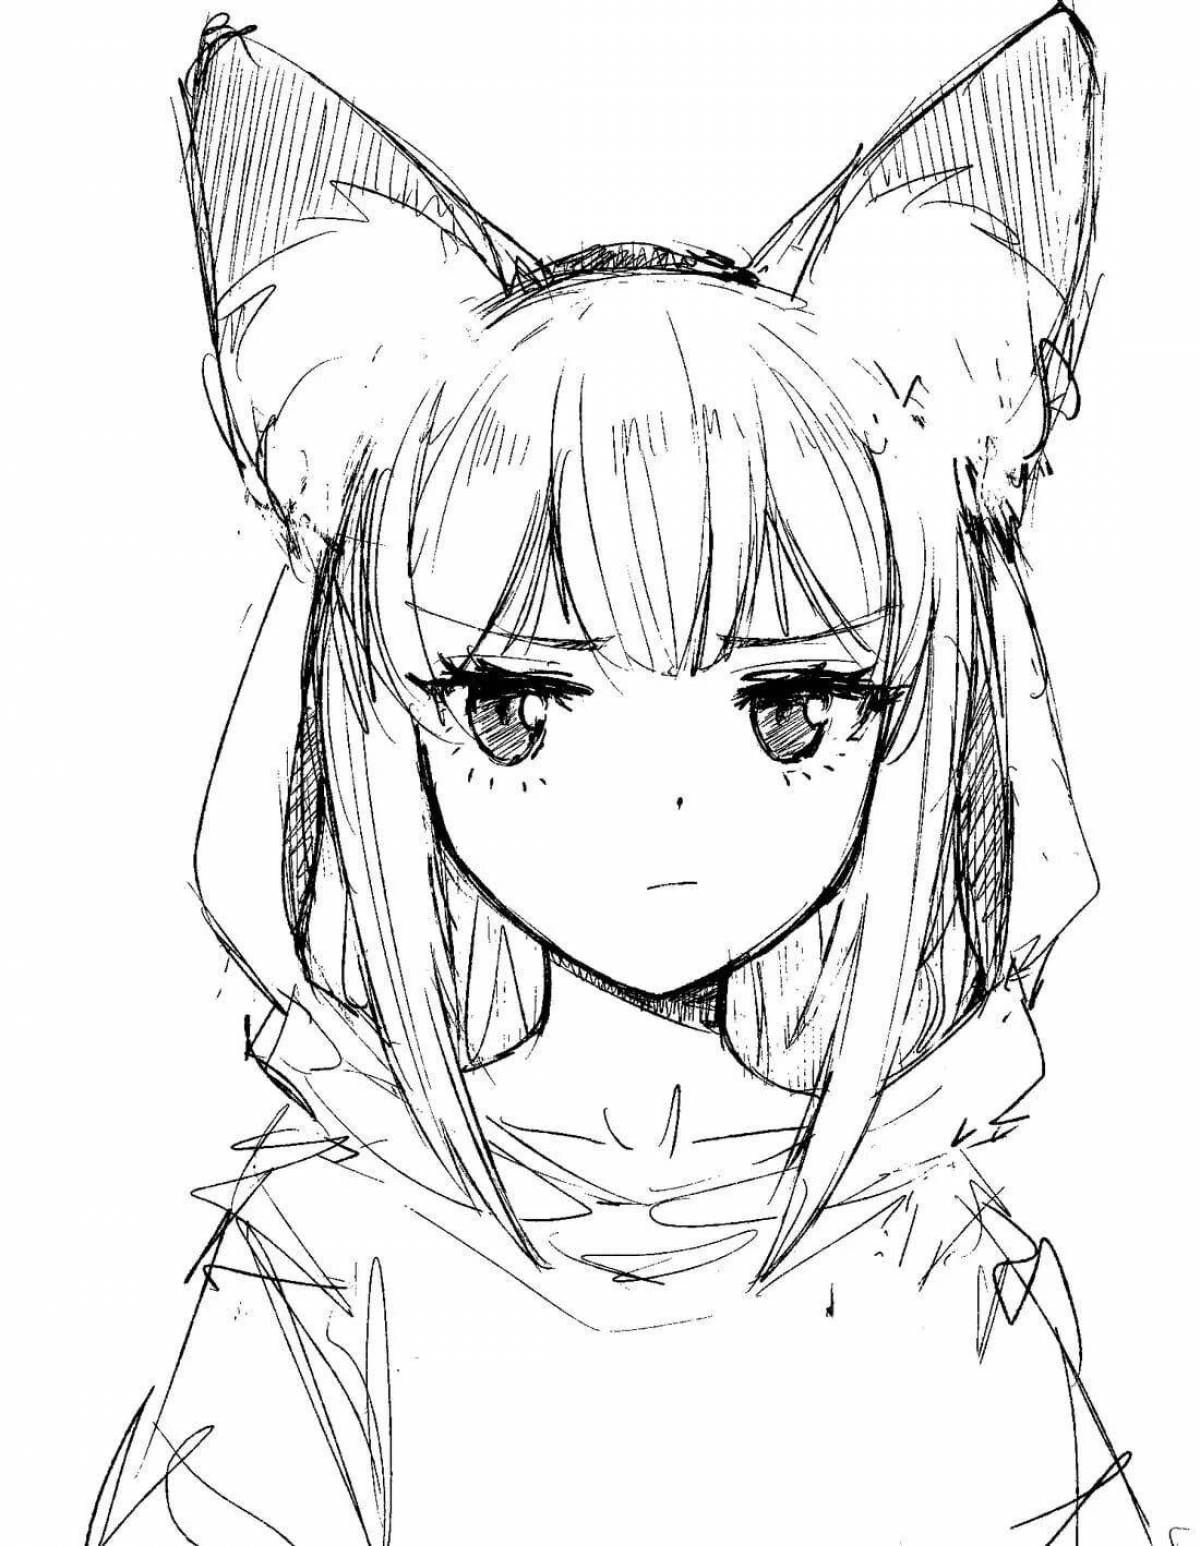 Charming coloring anime chan with ears